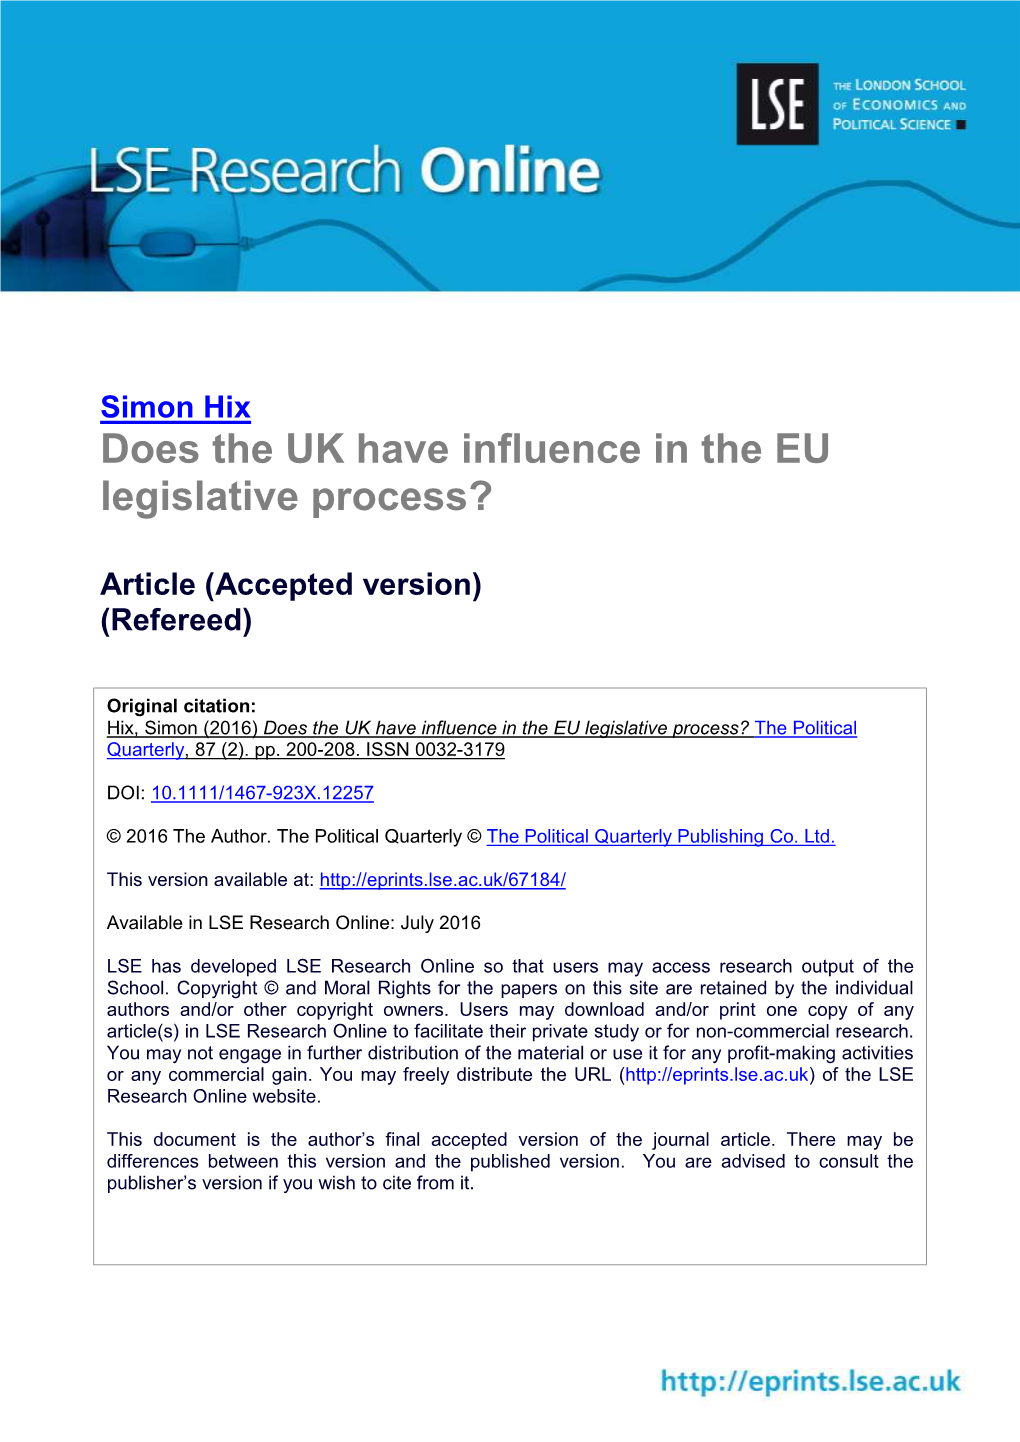 Does the UK Have Influence in the EU Legislative Process?